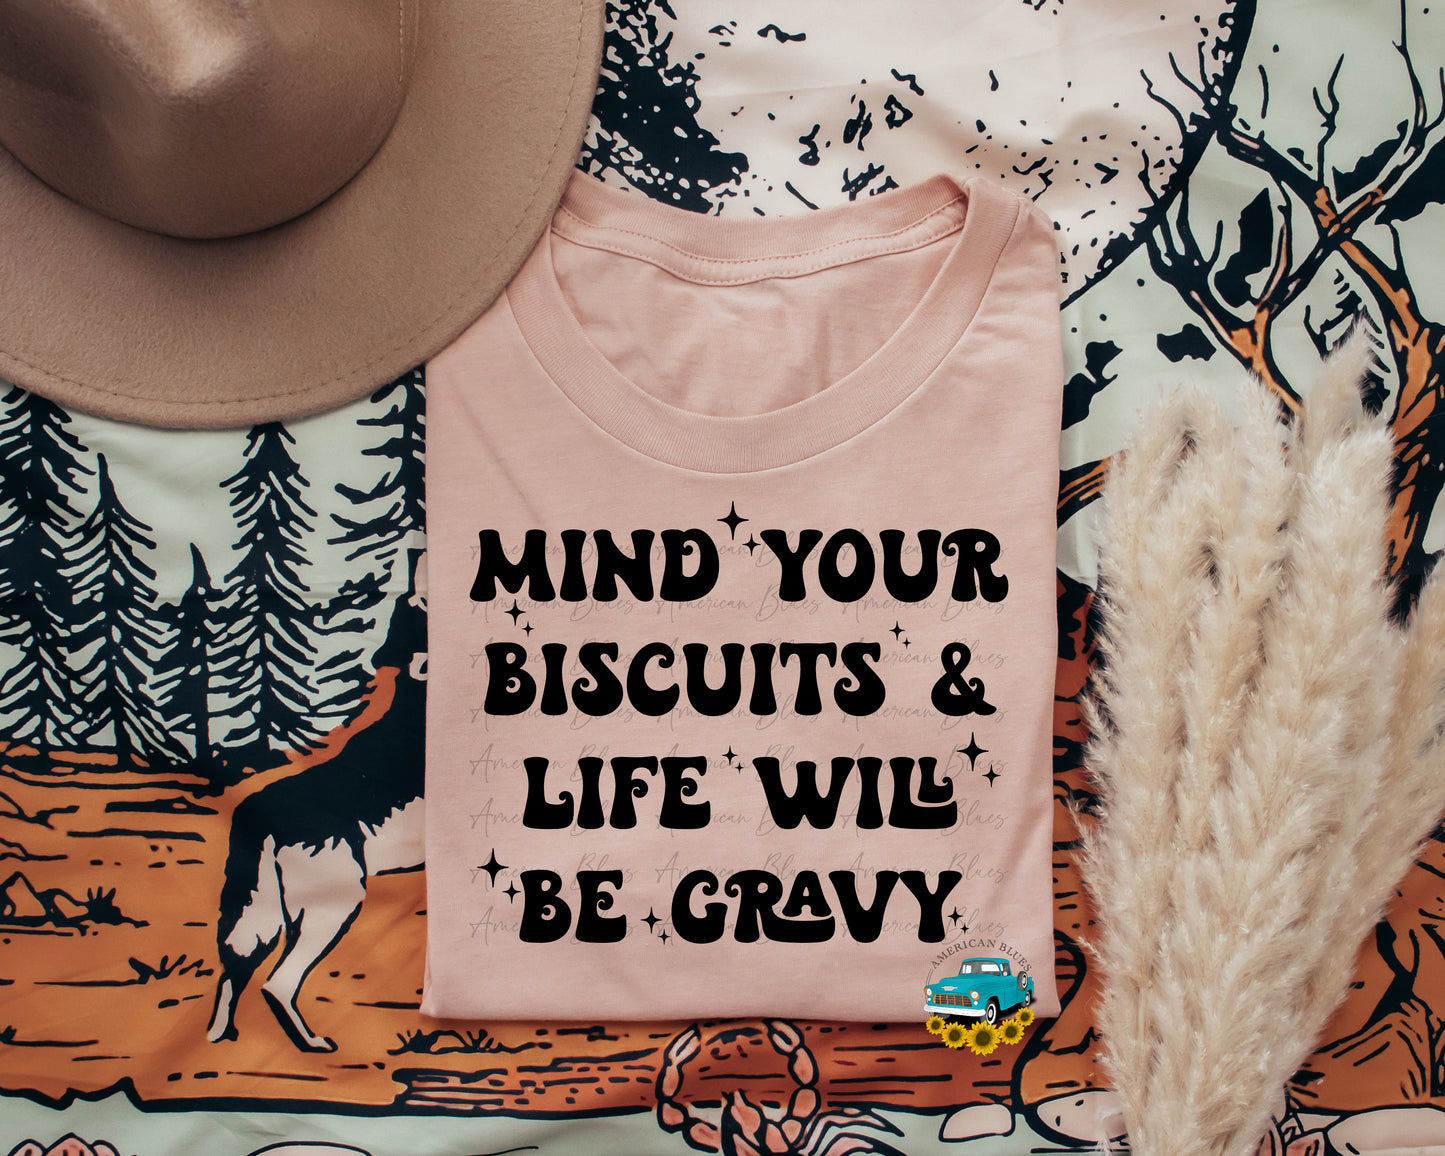 Mind your biscuits and life will be gravy